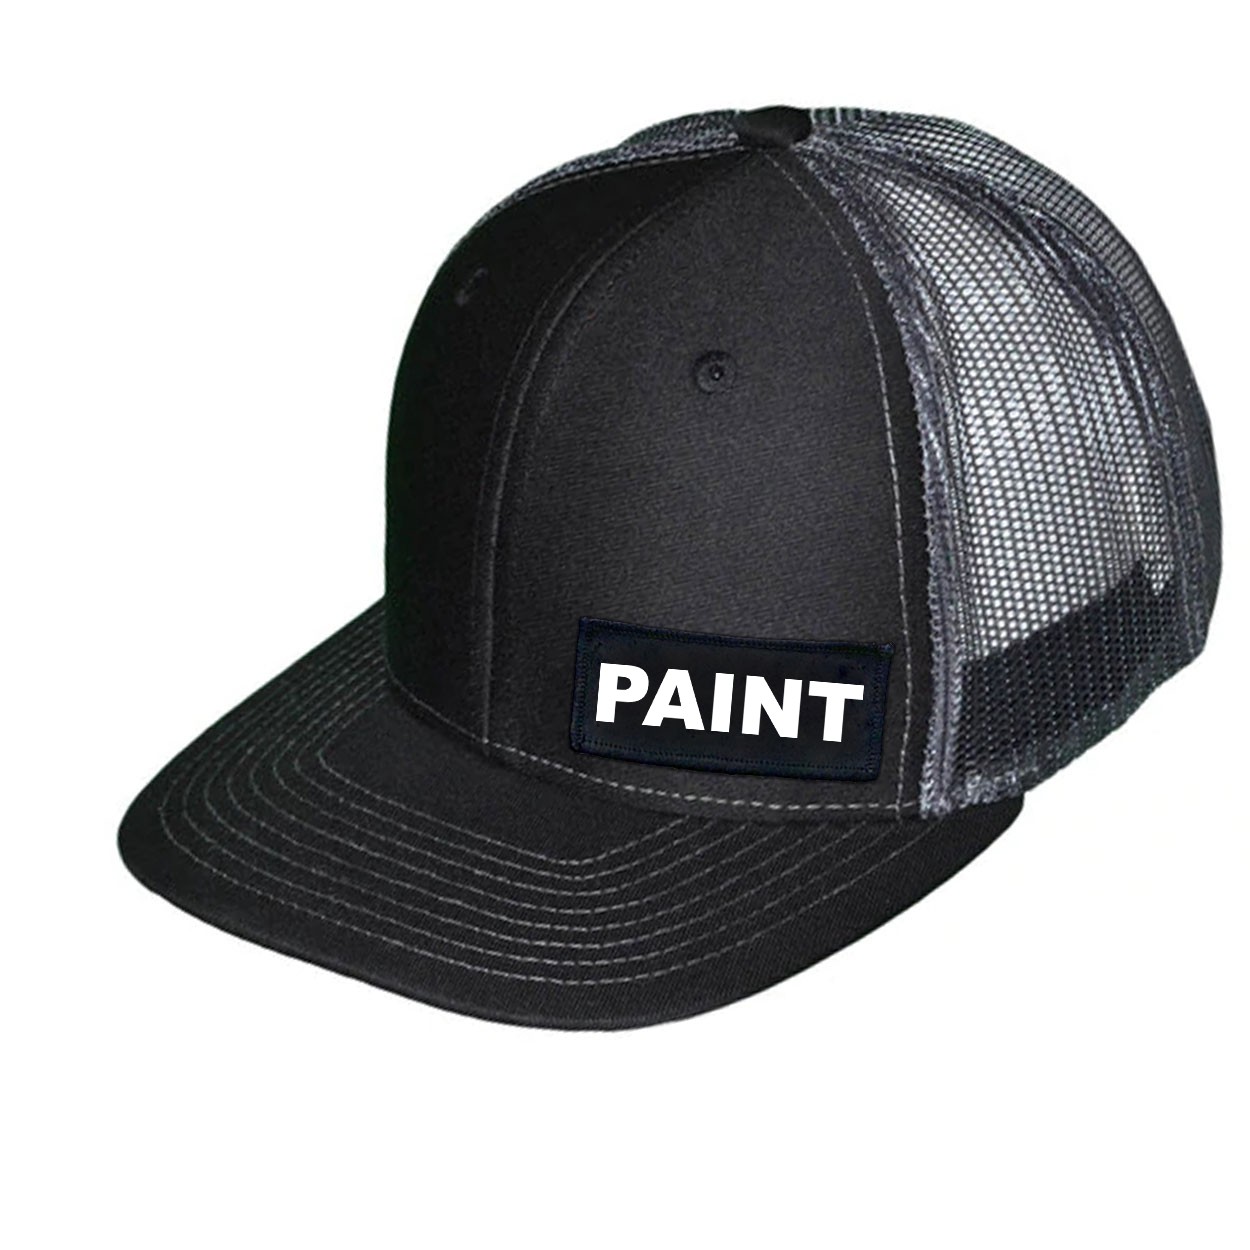 Paint Brand Logo Night Out Woven Patch Snapback Trucker Hat Black/Gray